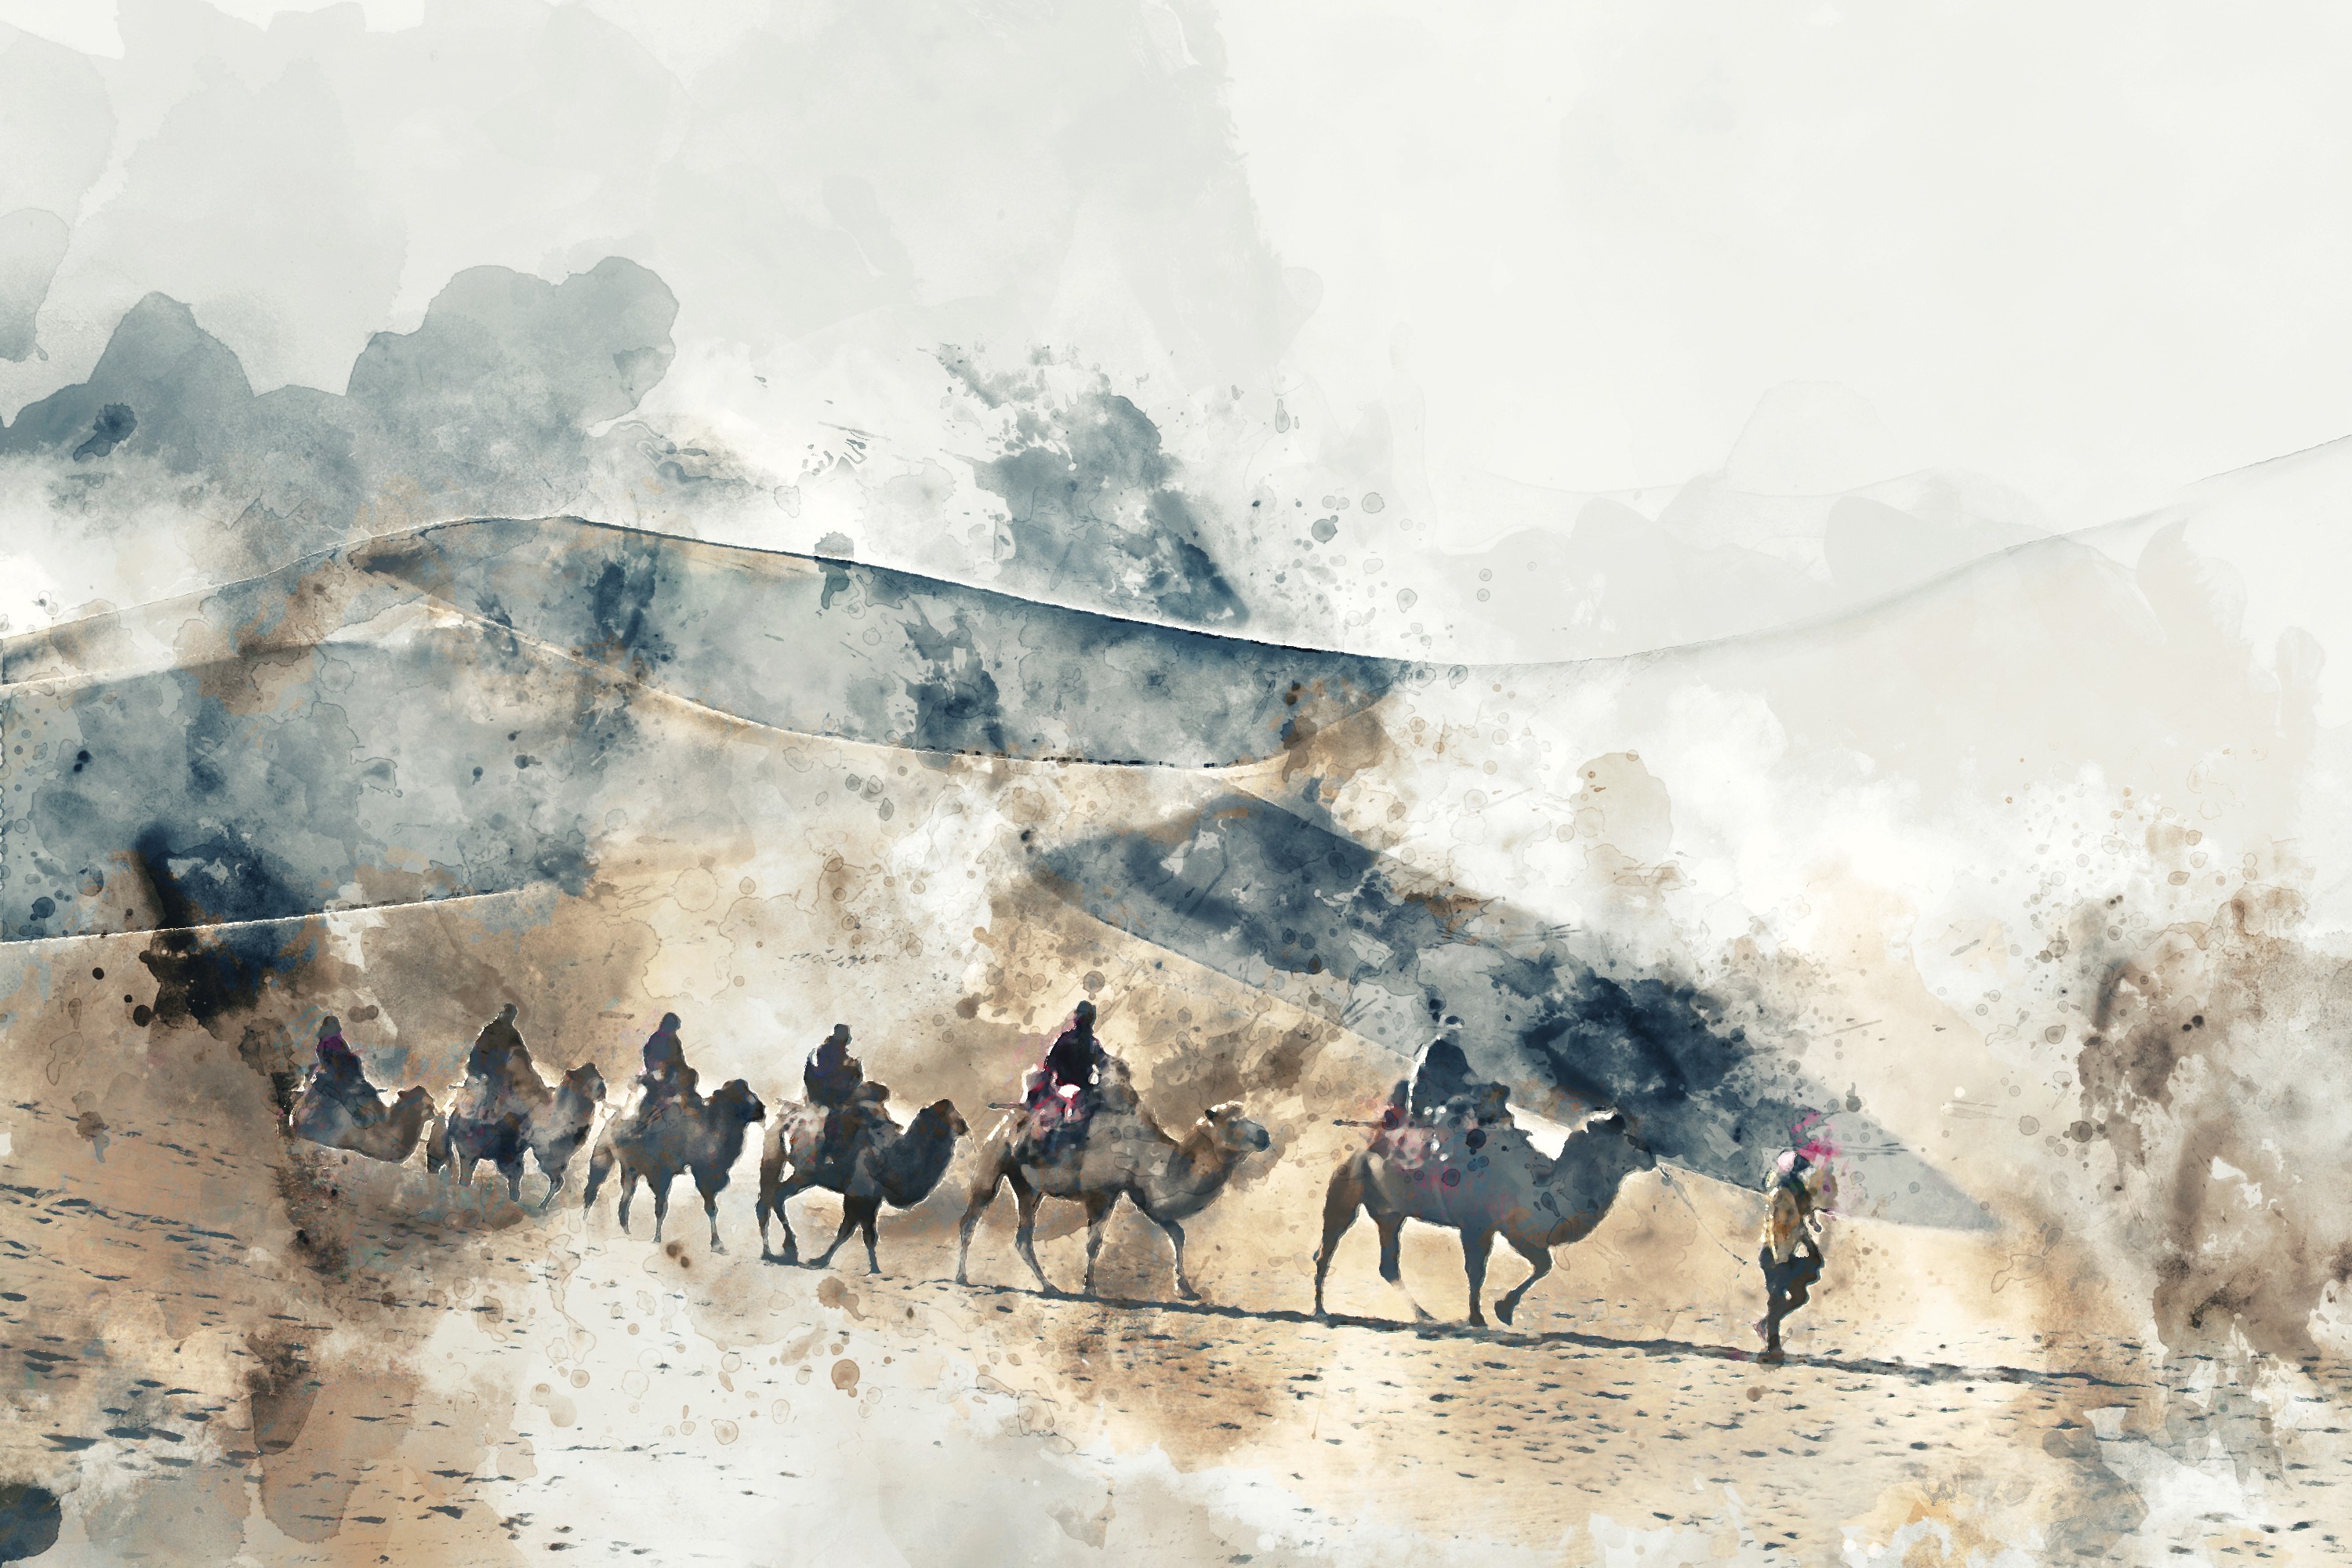 Antique-style image of camel train on the Silk Road. Photo: Shutterstock